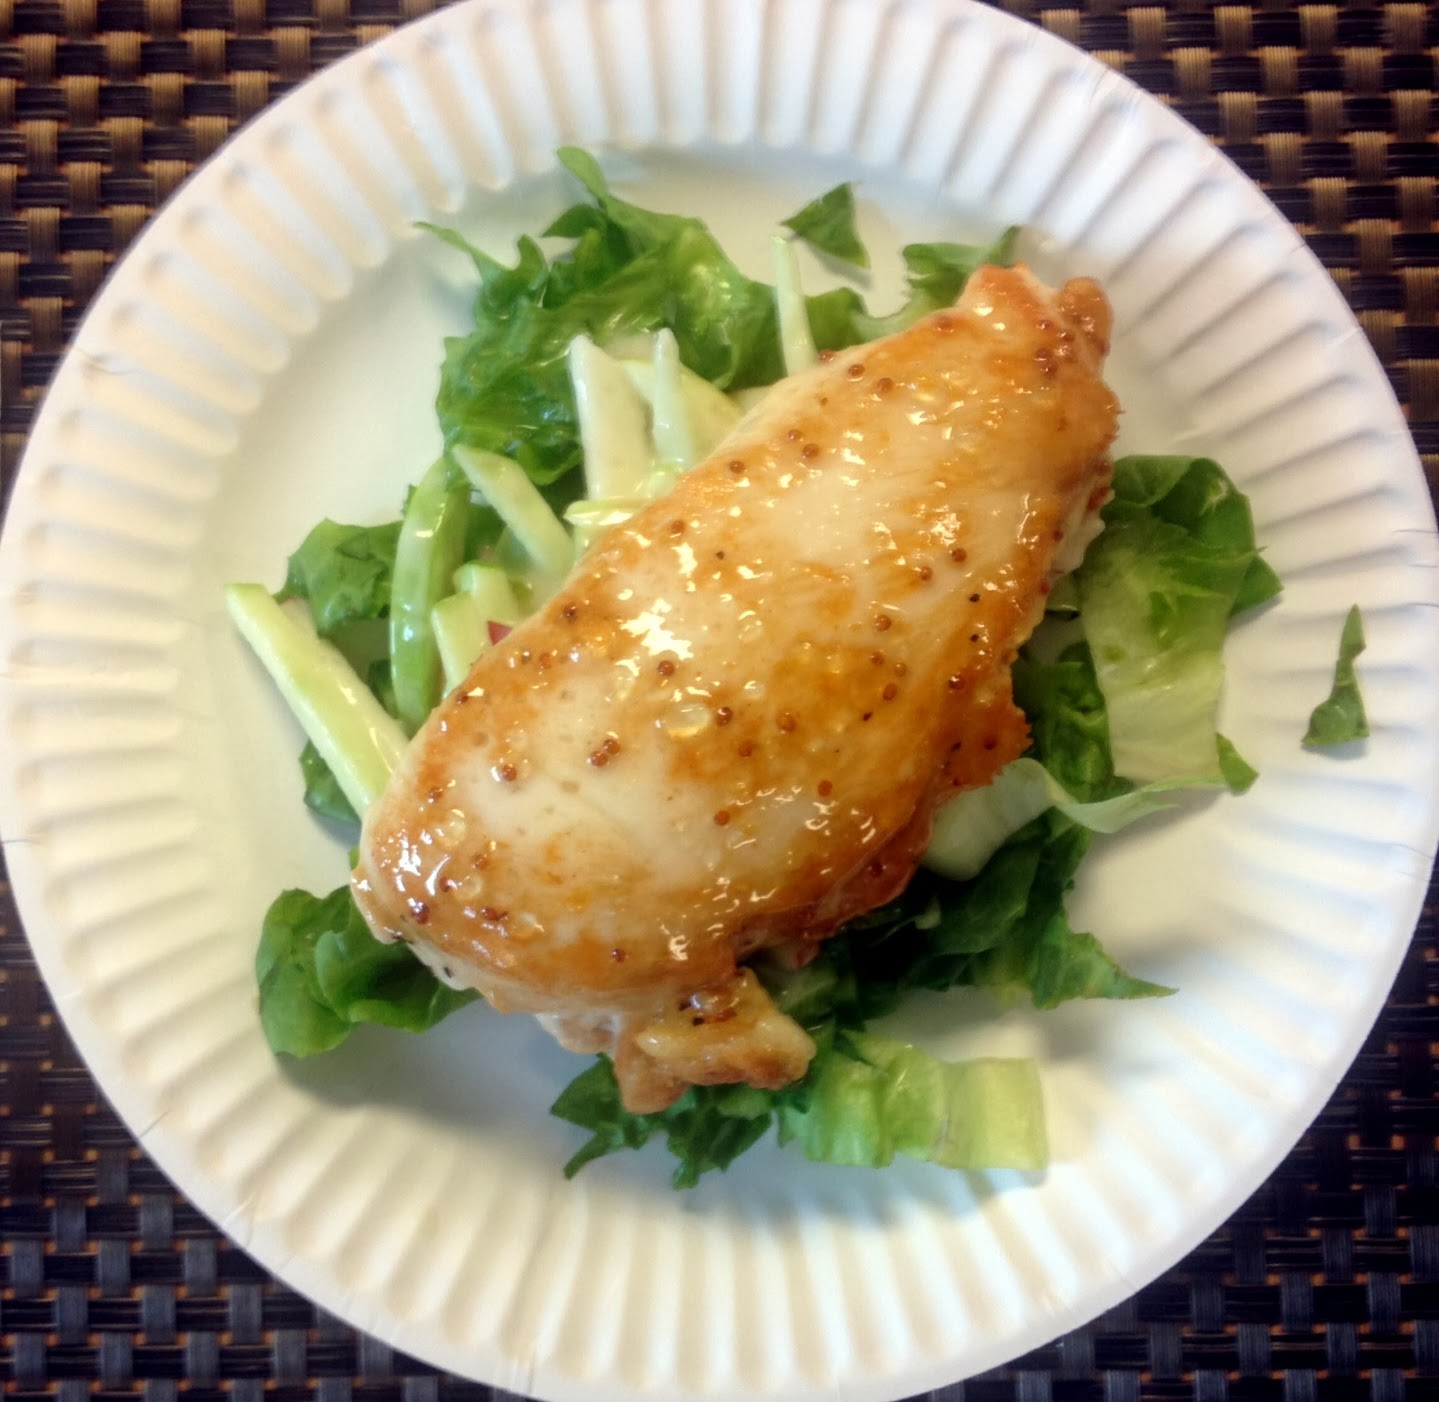 A Couple in the Kitchen: Cooking Club: Glazed Chicken with Apple Salad